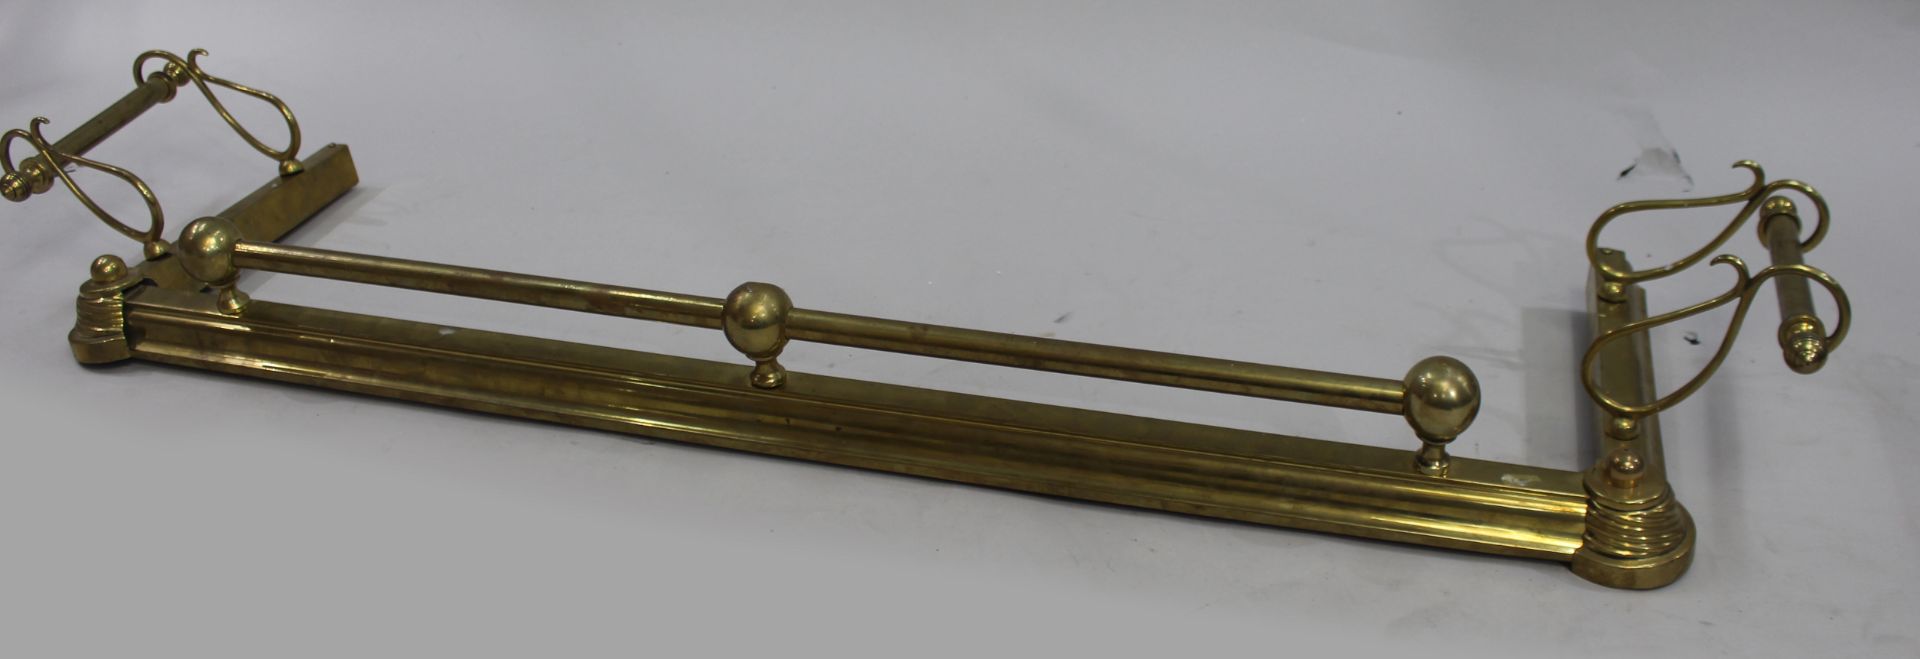 Antique Brass Fire Fender with Outswept Rests - Image 2 of 4